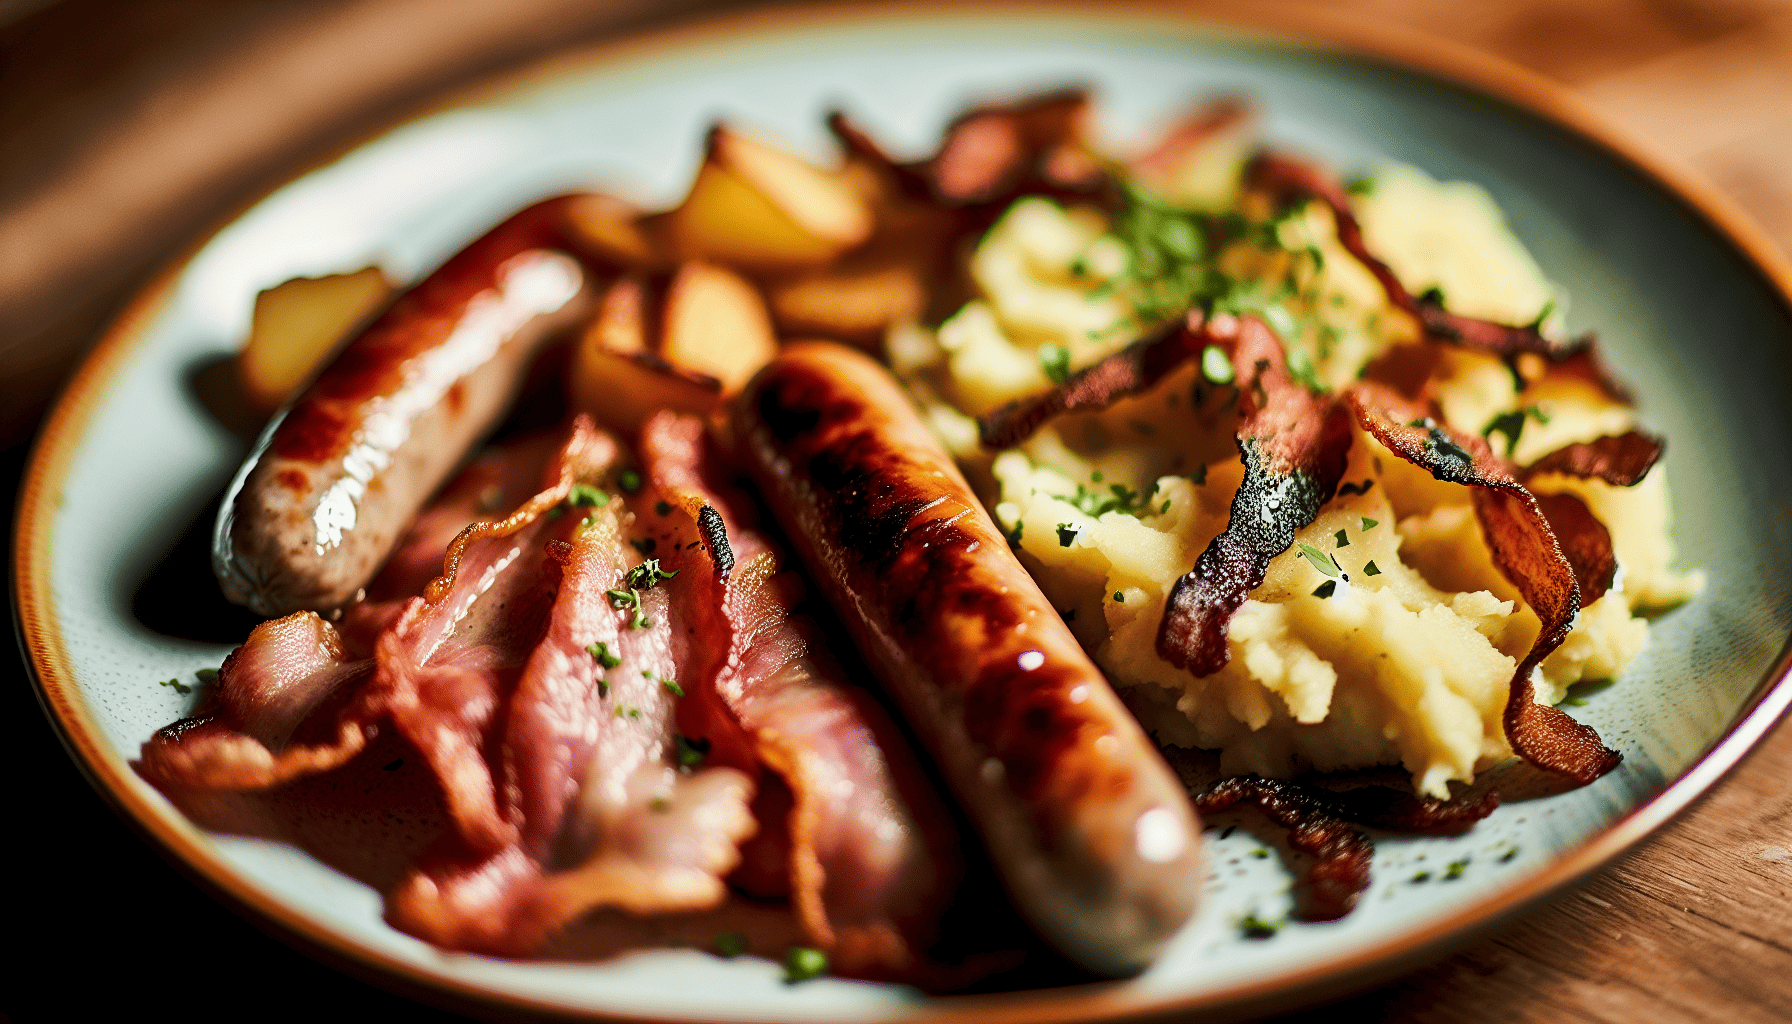 A sizzling Ulster Fry with sausages, bacon, and mashed potatoes